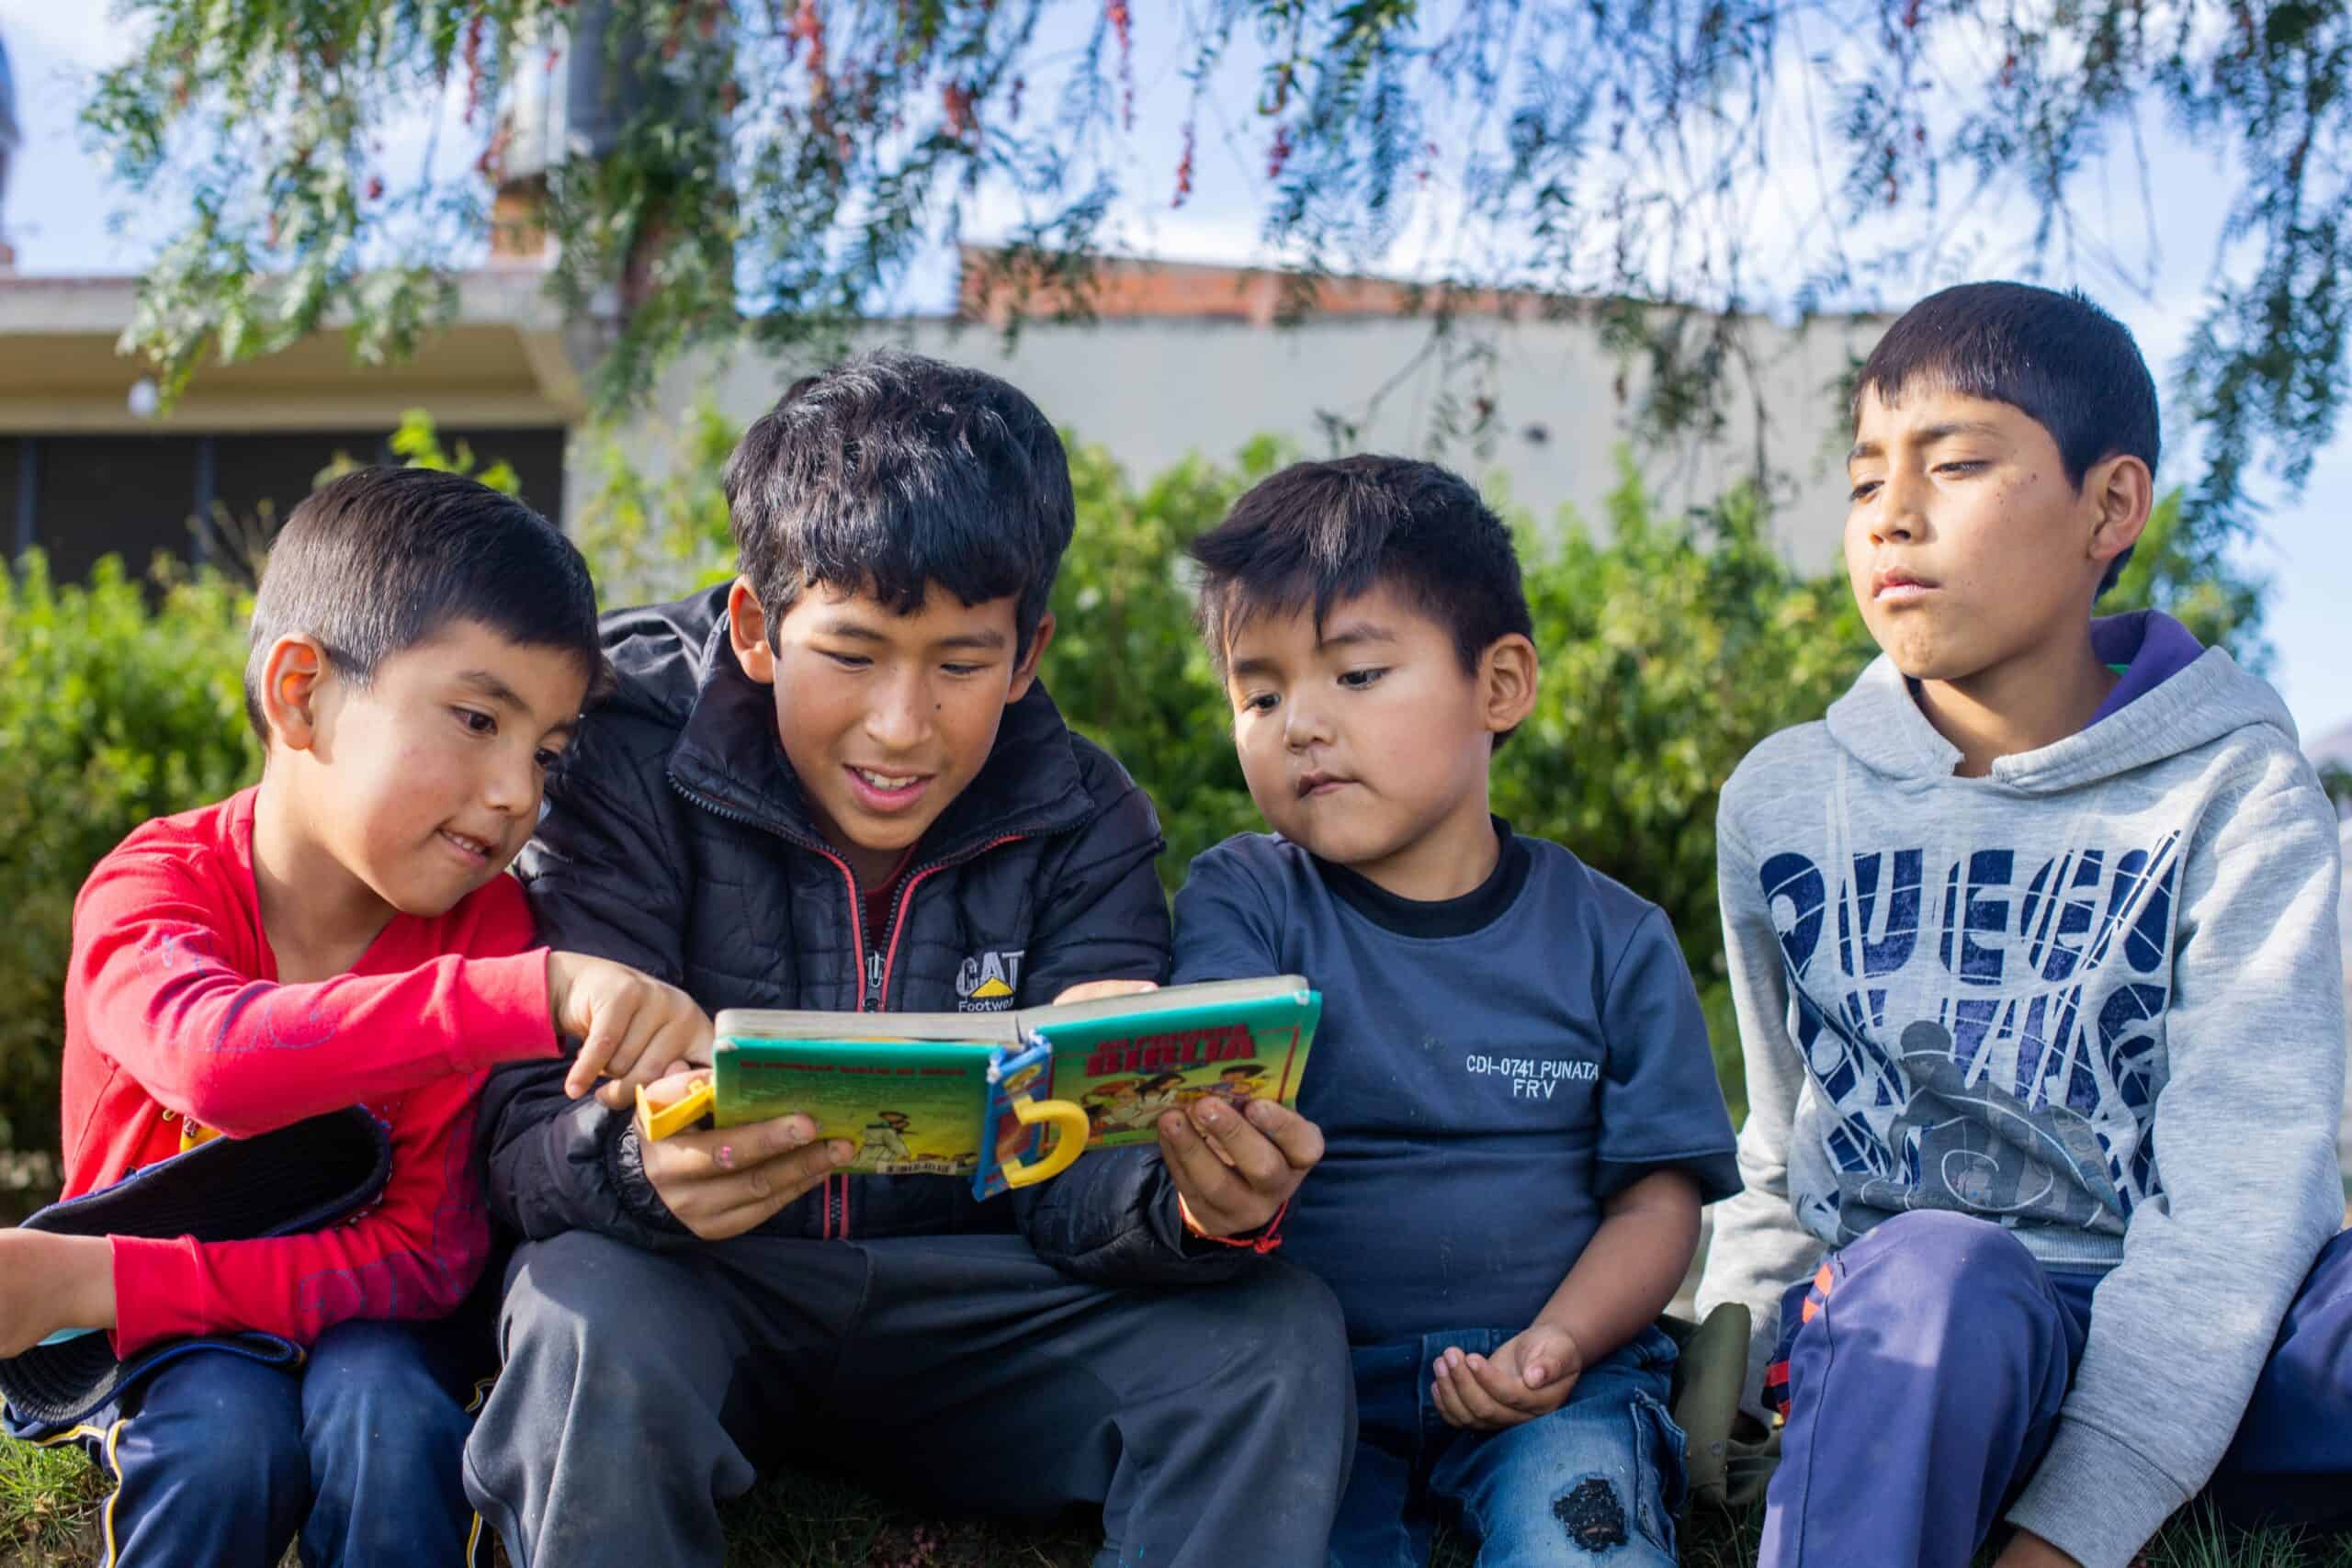 A group of four young boys sit outside and read the Bible together